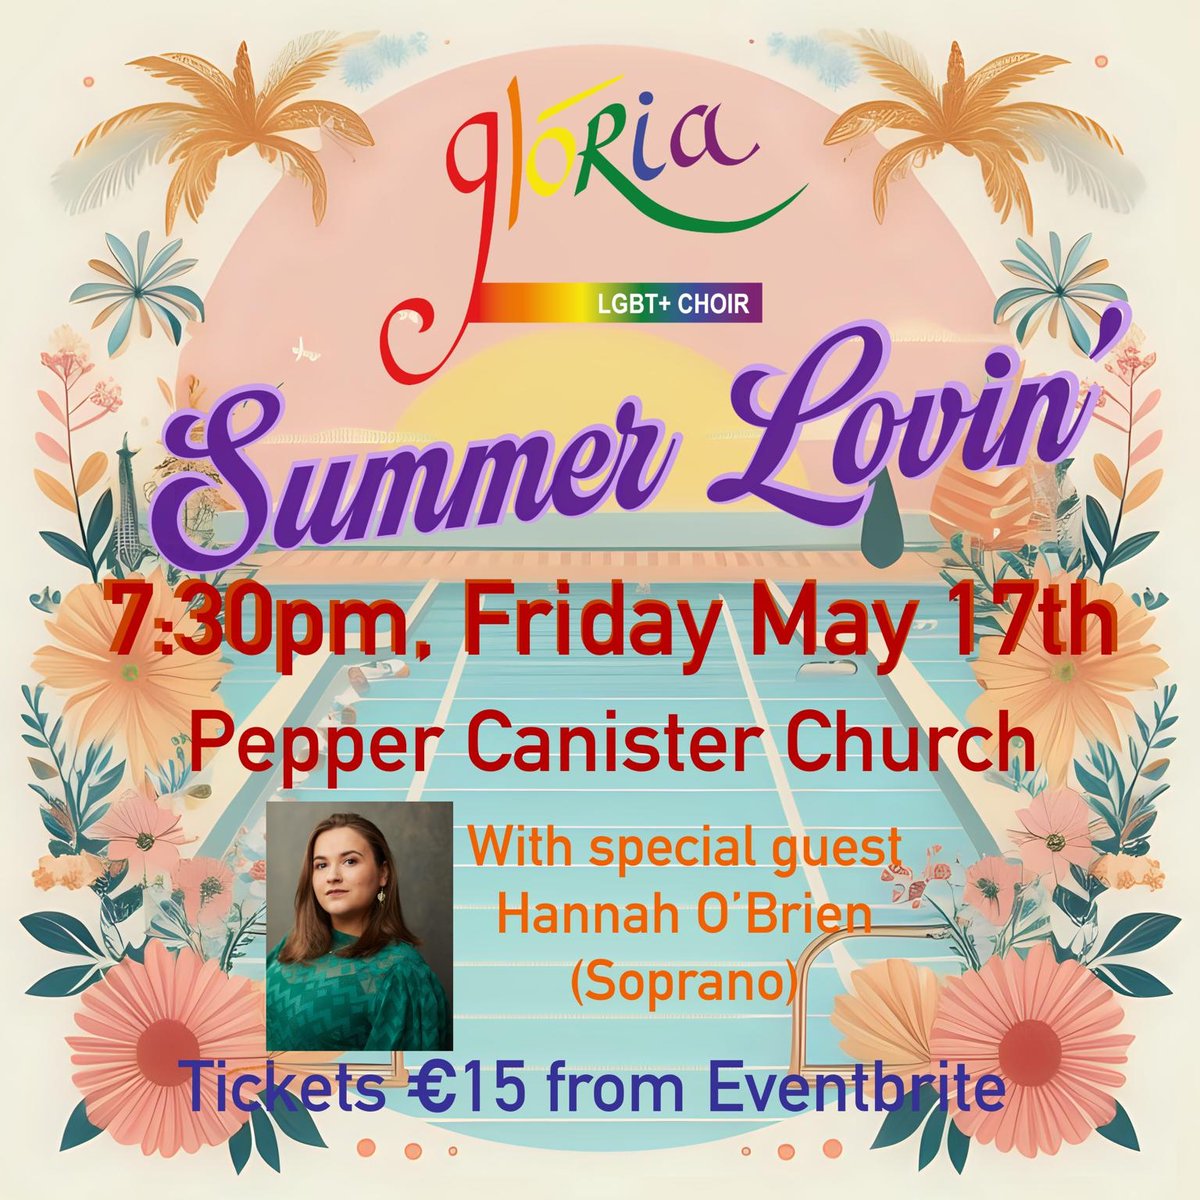 Tickets for our summer concert are on sale with special guest soprano, Hannah O'Brien ❤️🌞☀️eventbrite.com/e/summer-lovin…